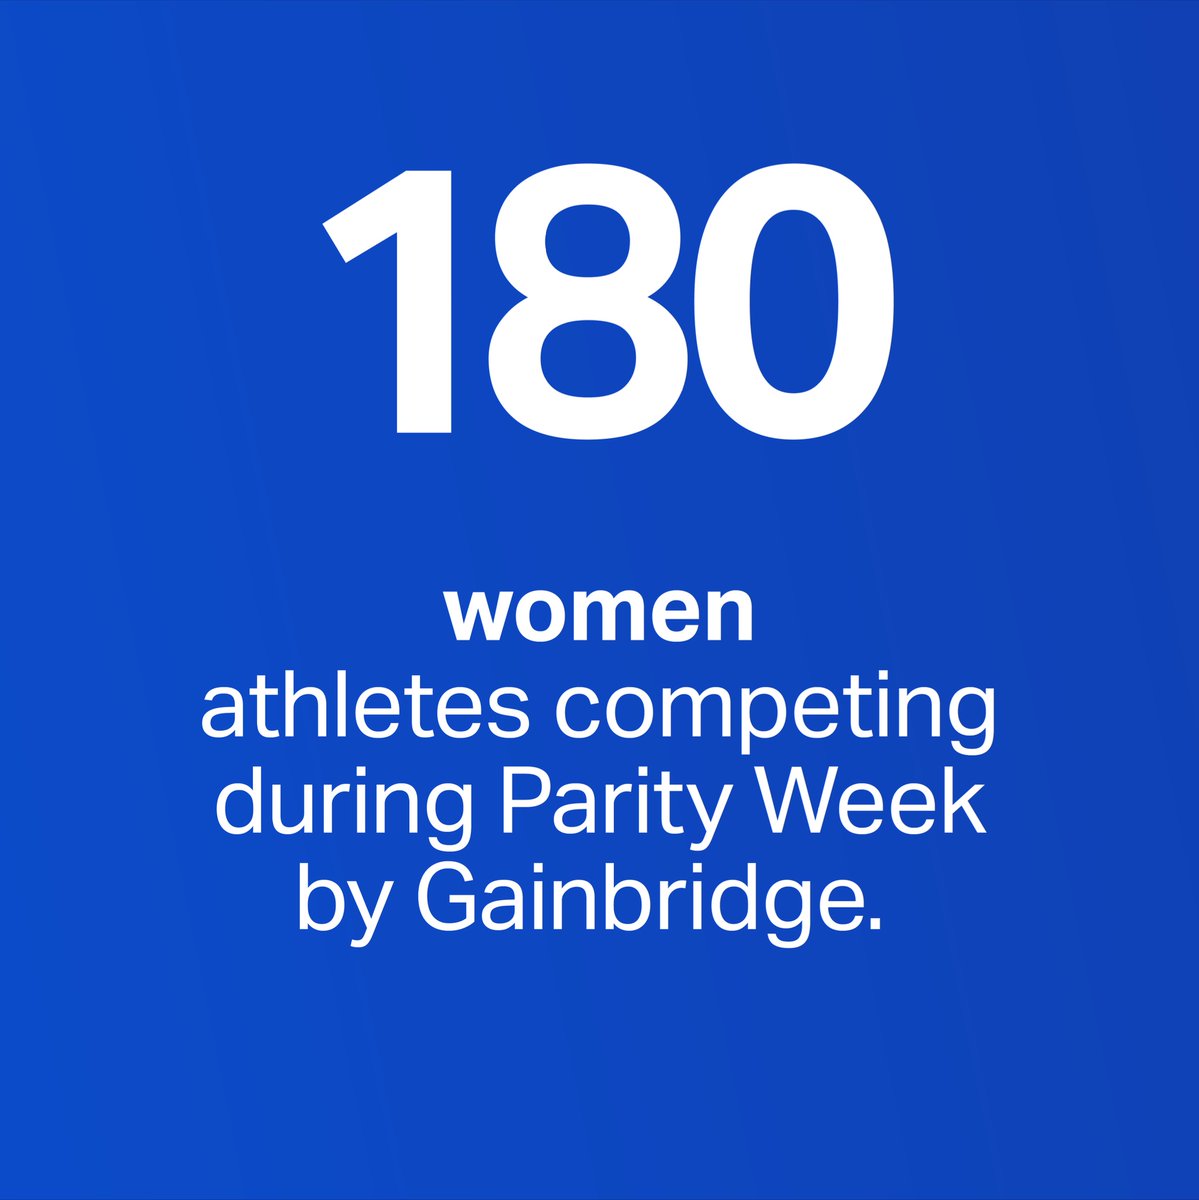 Join us for #ParityWeek November 6-12! We’re leveling the playing field by partnering with our sister company, @paritynow_, a brand committed to closing the gender income and opportunity gap in professional sports. Learn more about Parity Week here: okt.to/2PCyLI